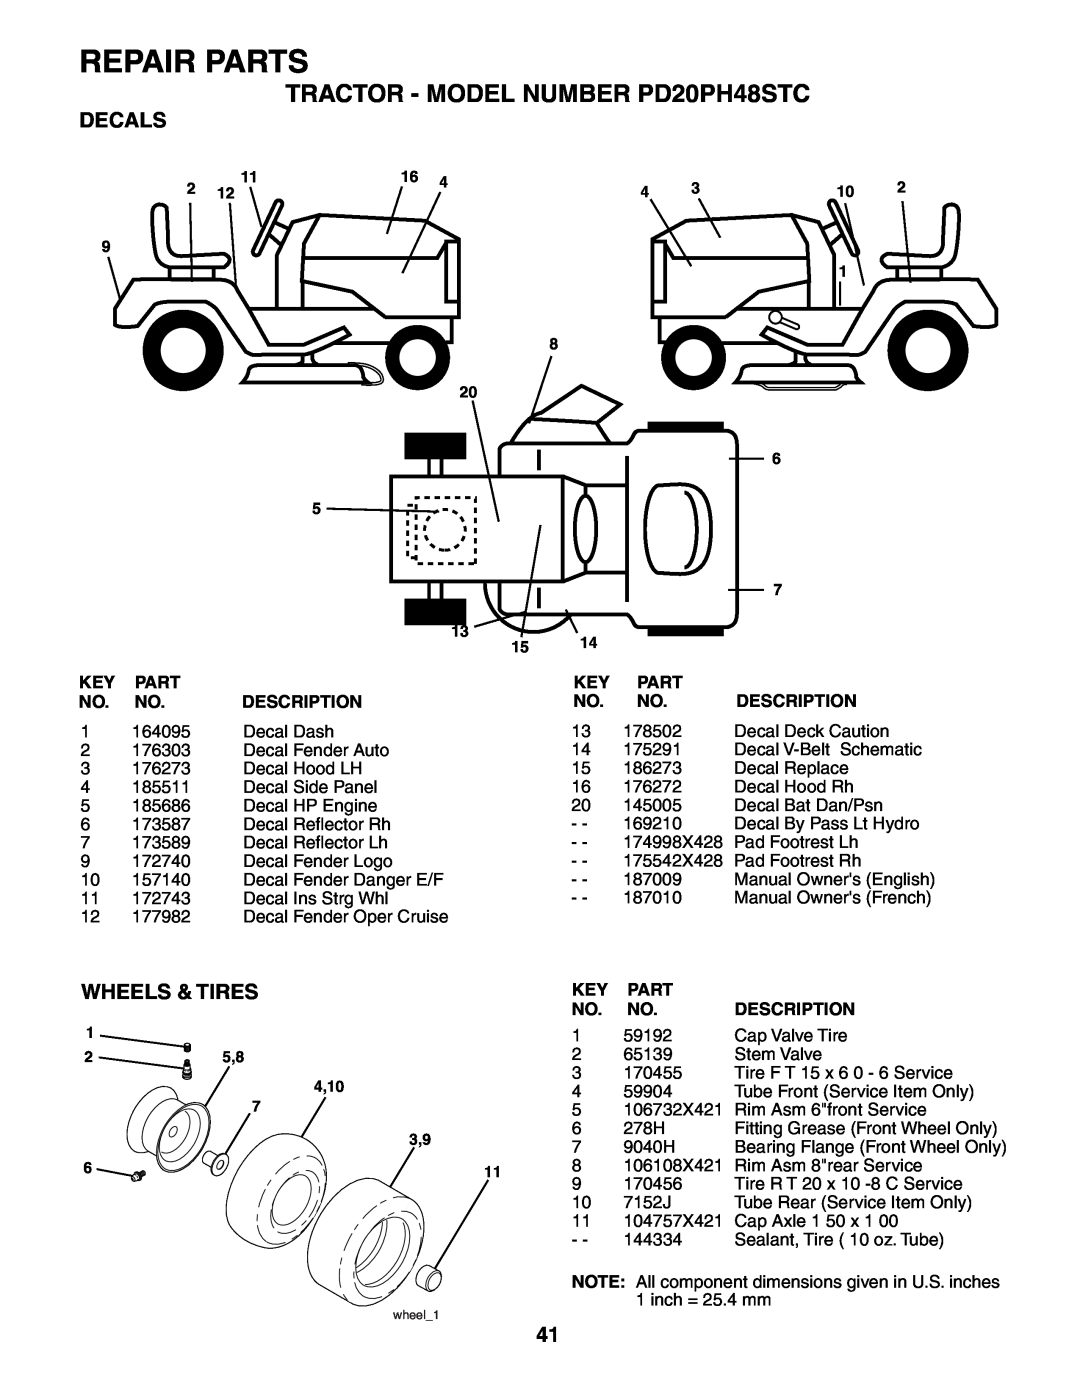 Poulan 187009 owner manual Decals, Wheels & Tires, Repair Parts, TRACTOR - MODEL NUMBER PD20PH48STC, 4,10 